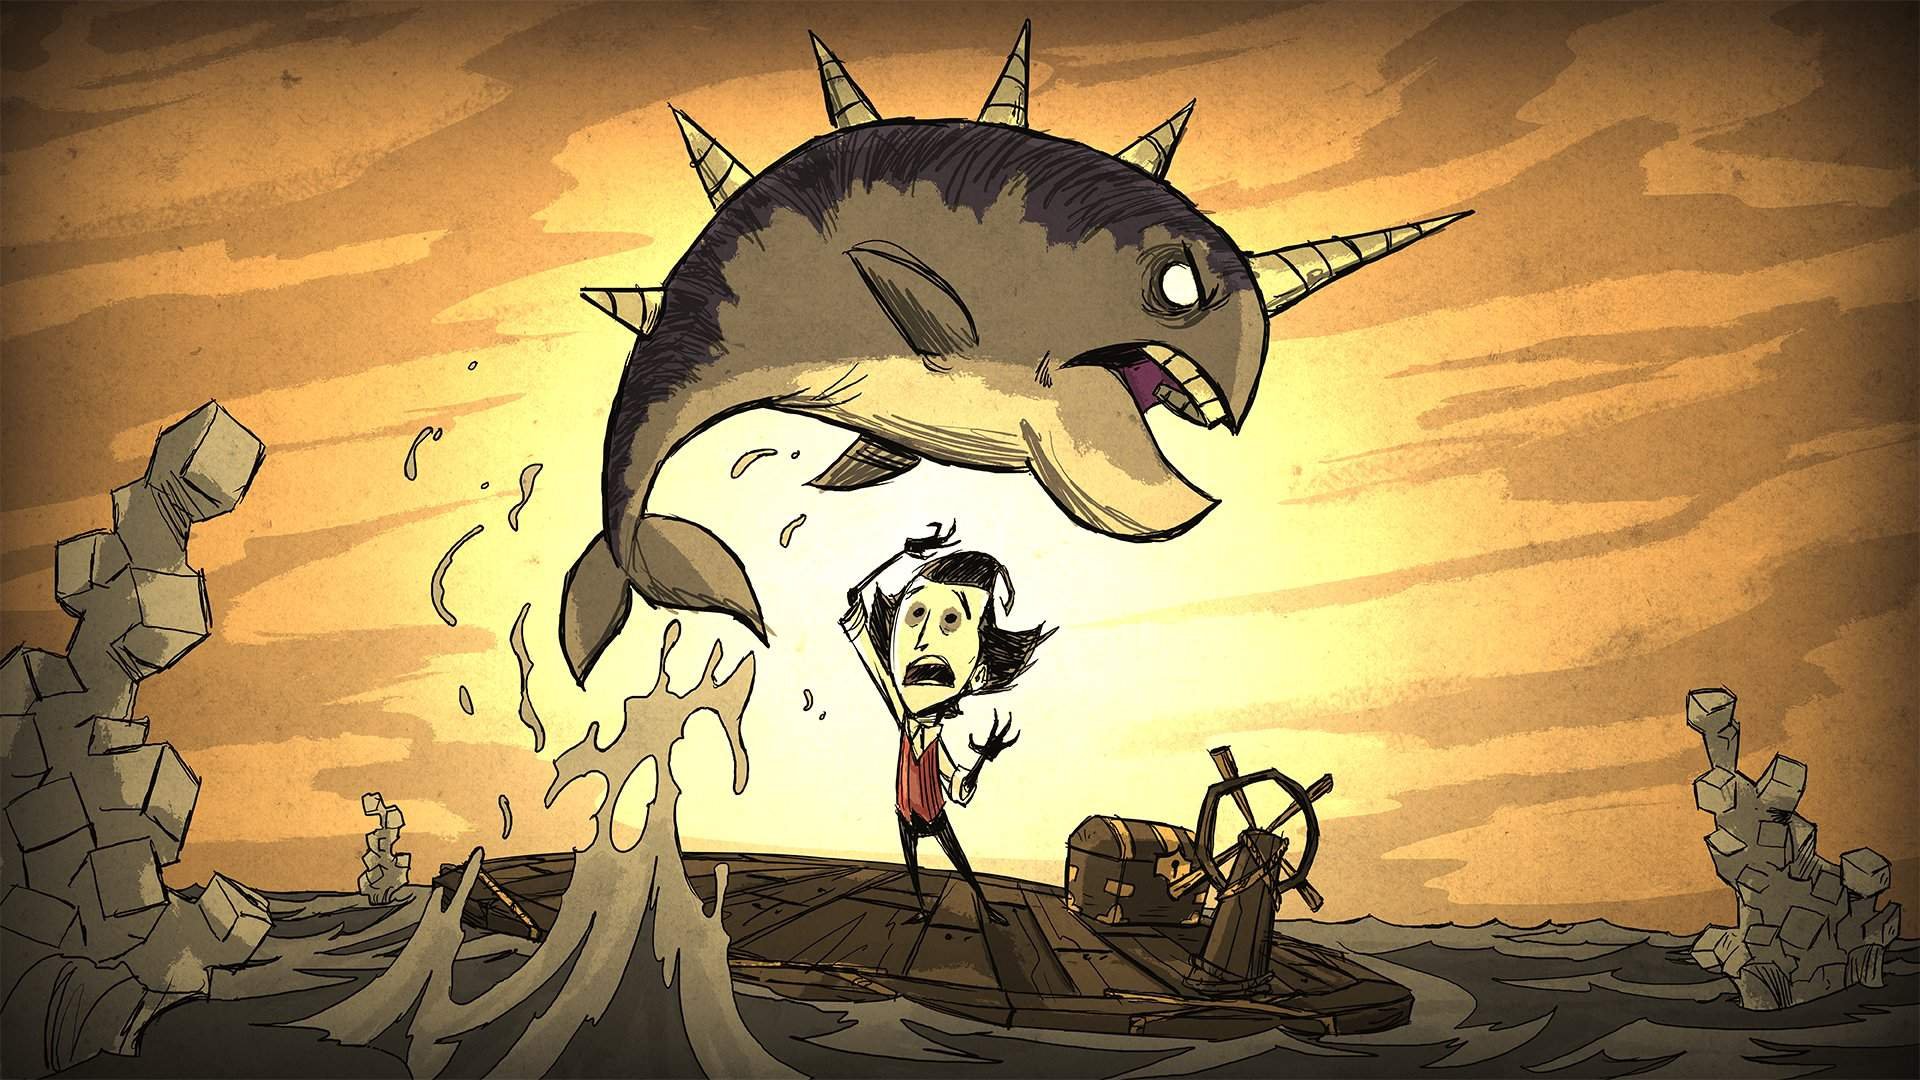 Dont le. Донт старв. Don t Starve together. Донт старв тугезер. Донт старв донт старв.